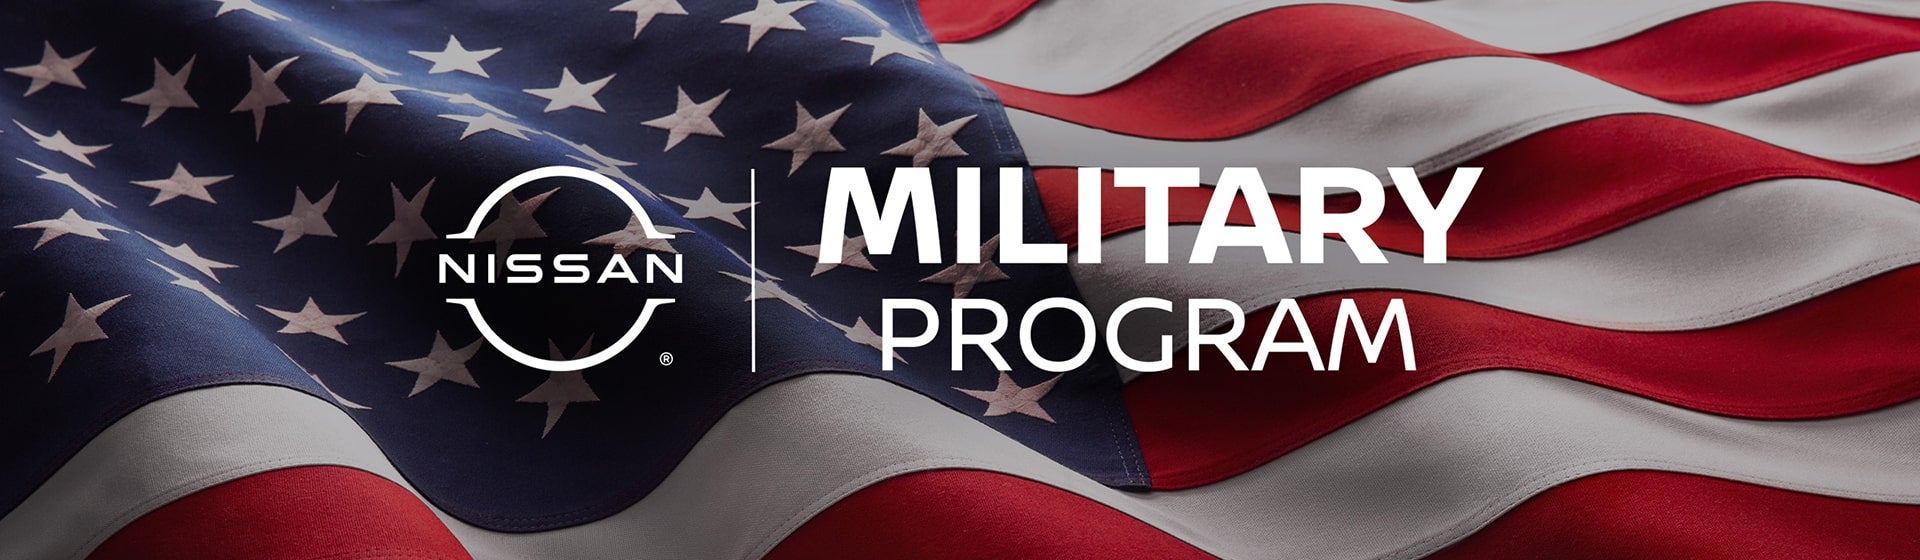 Nissan Military Discount | Benton Nissan of Hoover in Hoover AL